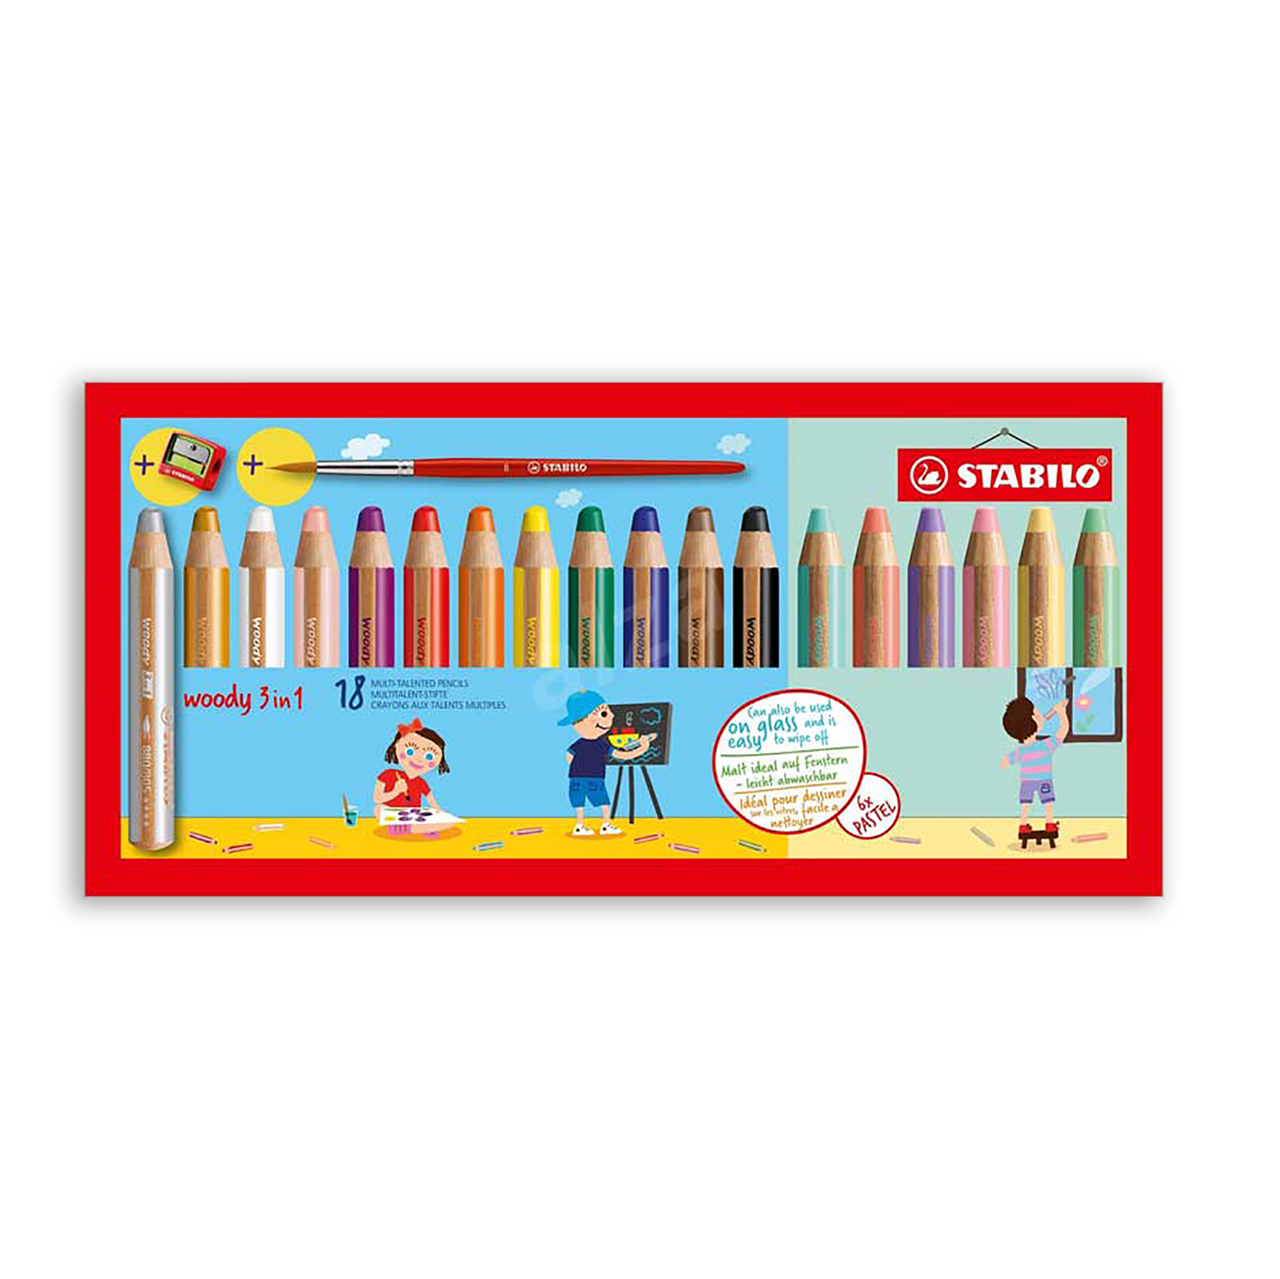 STABILO Woody 3 in 1 Multi Talent Pencil Crayon - Black (Pack of 5)